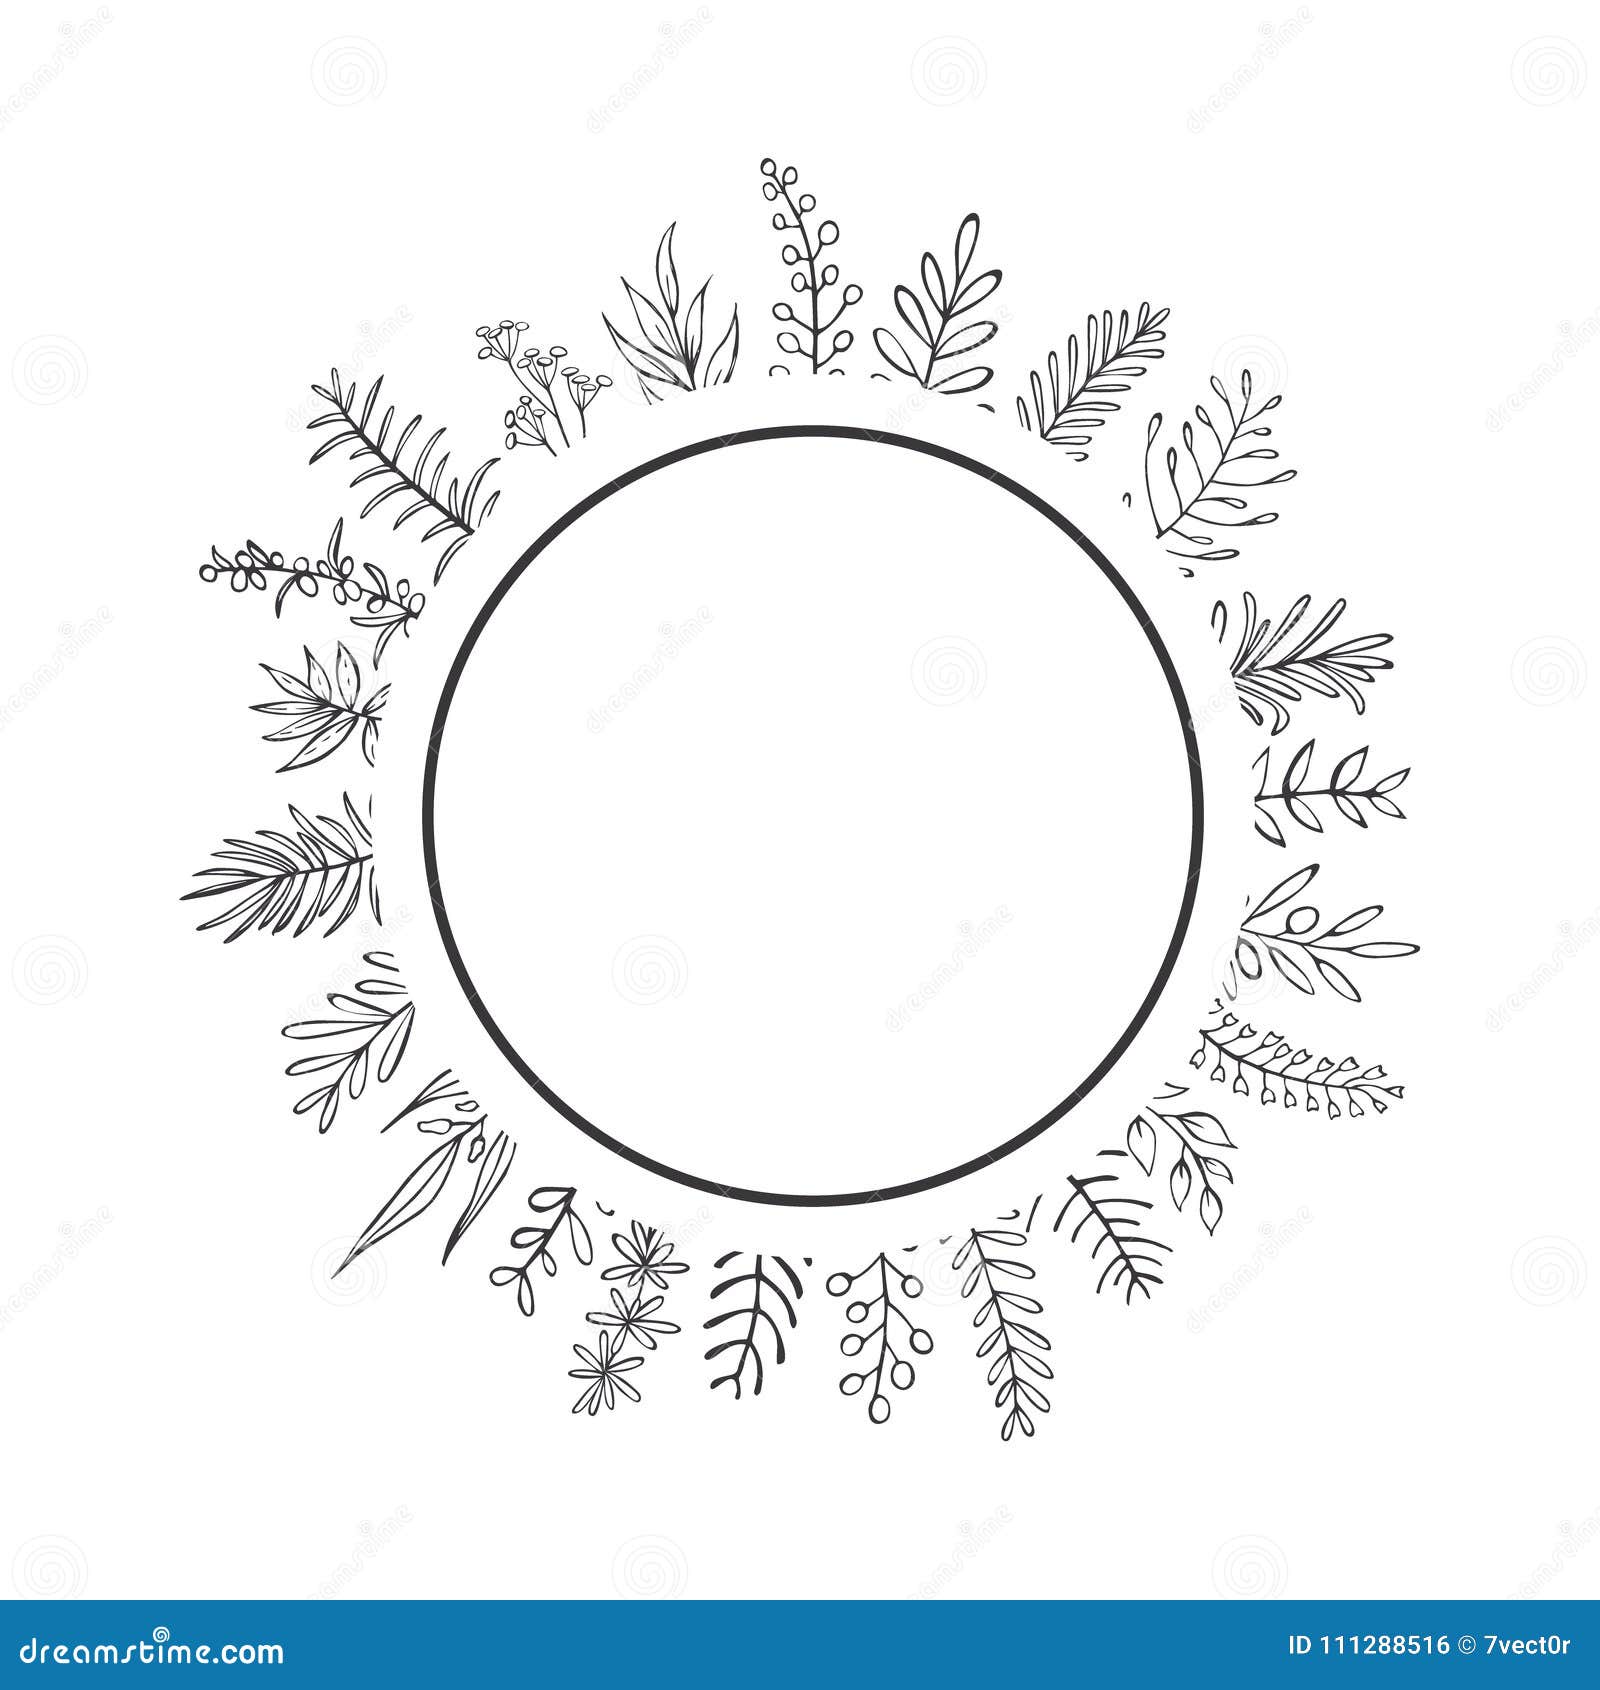 black and white farmhouse style hand drawn outlined branches and twigs circle round frame